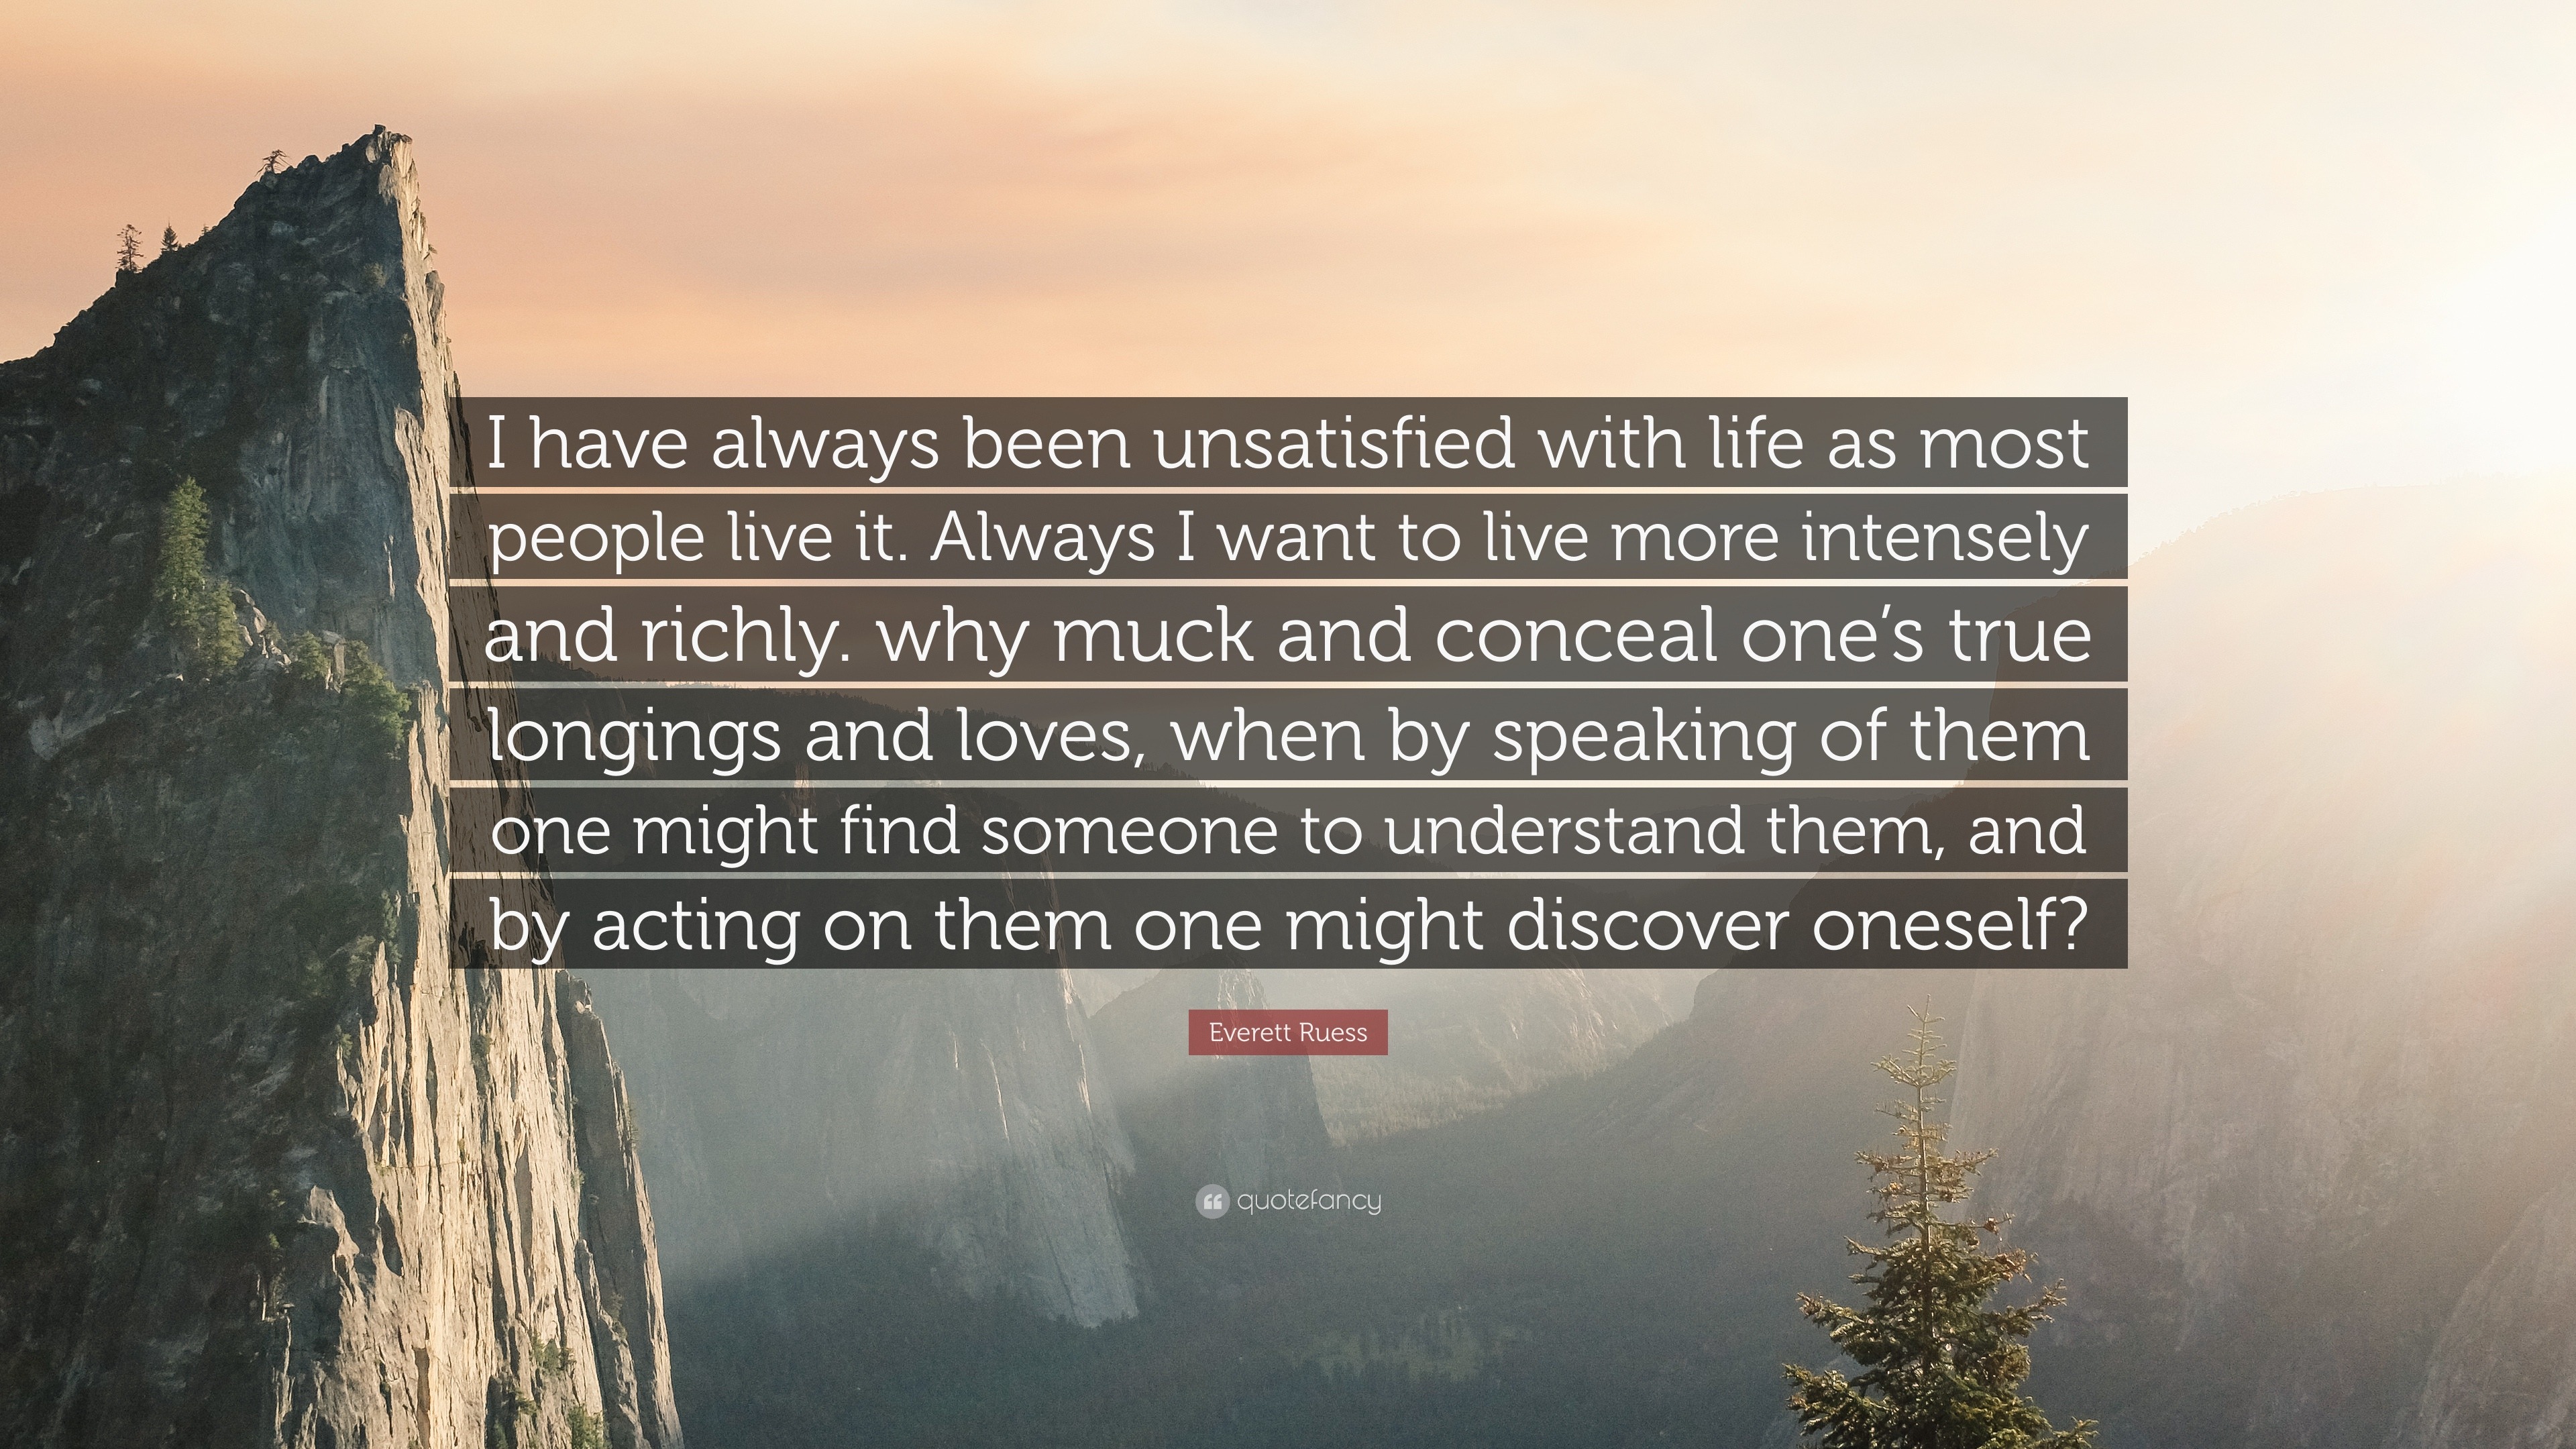 Everett Ruess Quote “I have always been unsatisfied with life as most